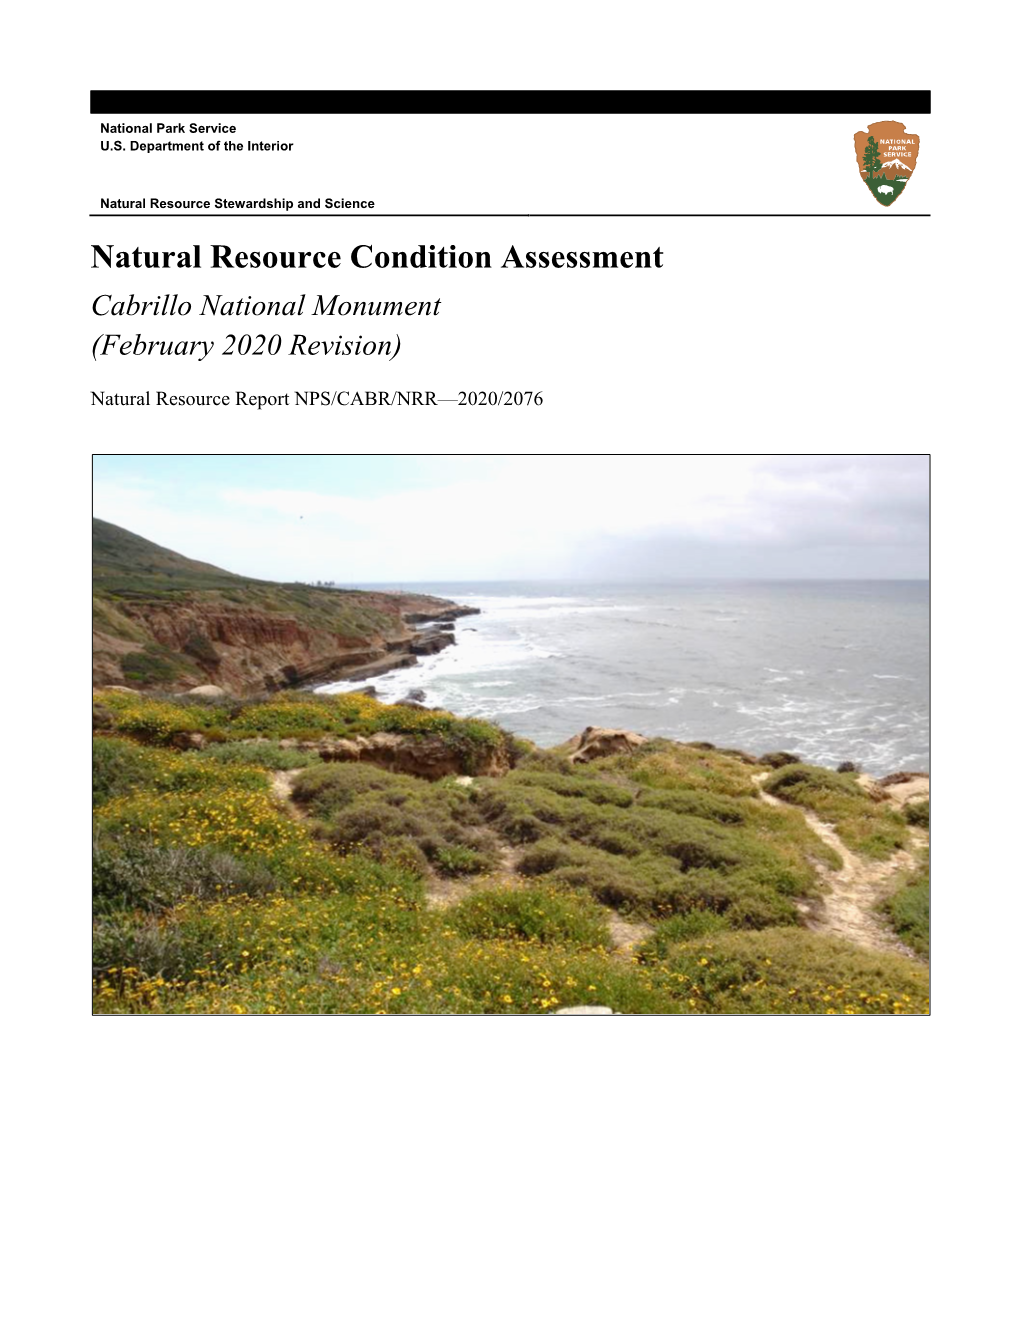 Cabrillo National Monument (February 2020 Revision)